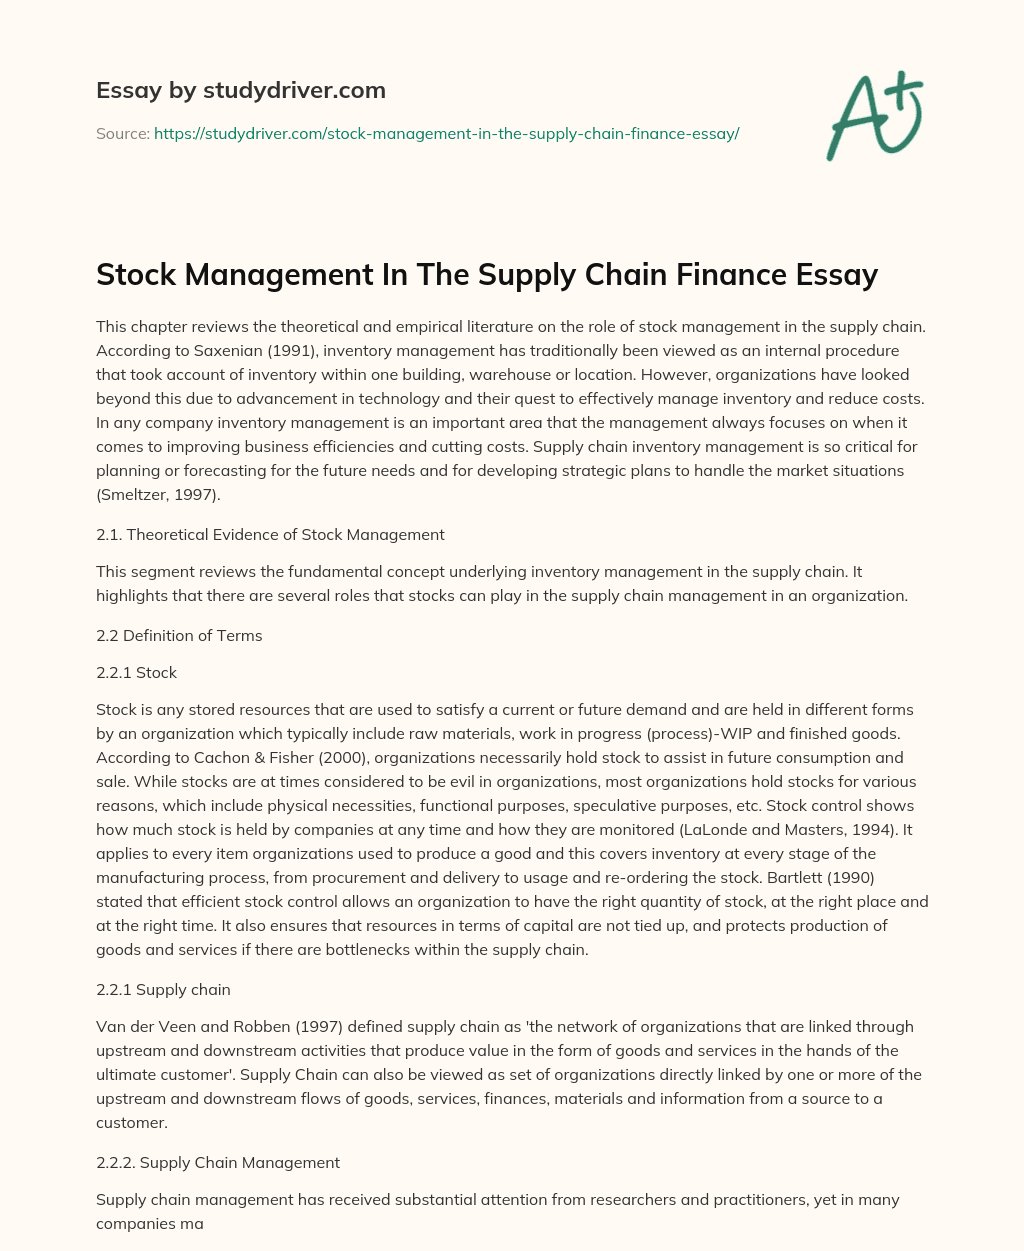 Stock Management in the Supply Chain Finance Essay essay